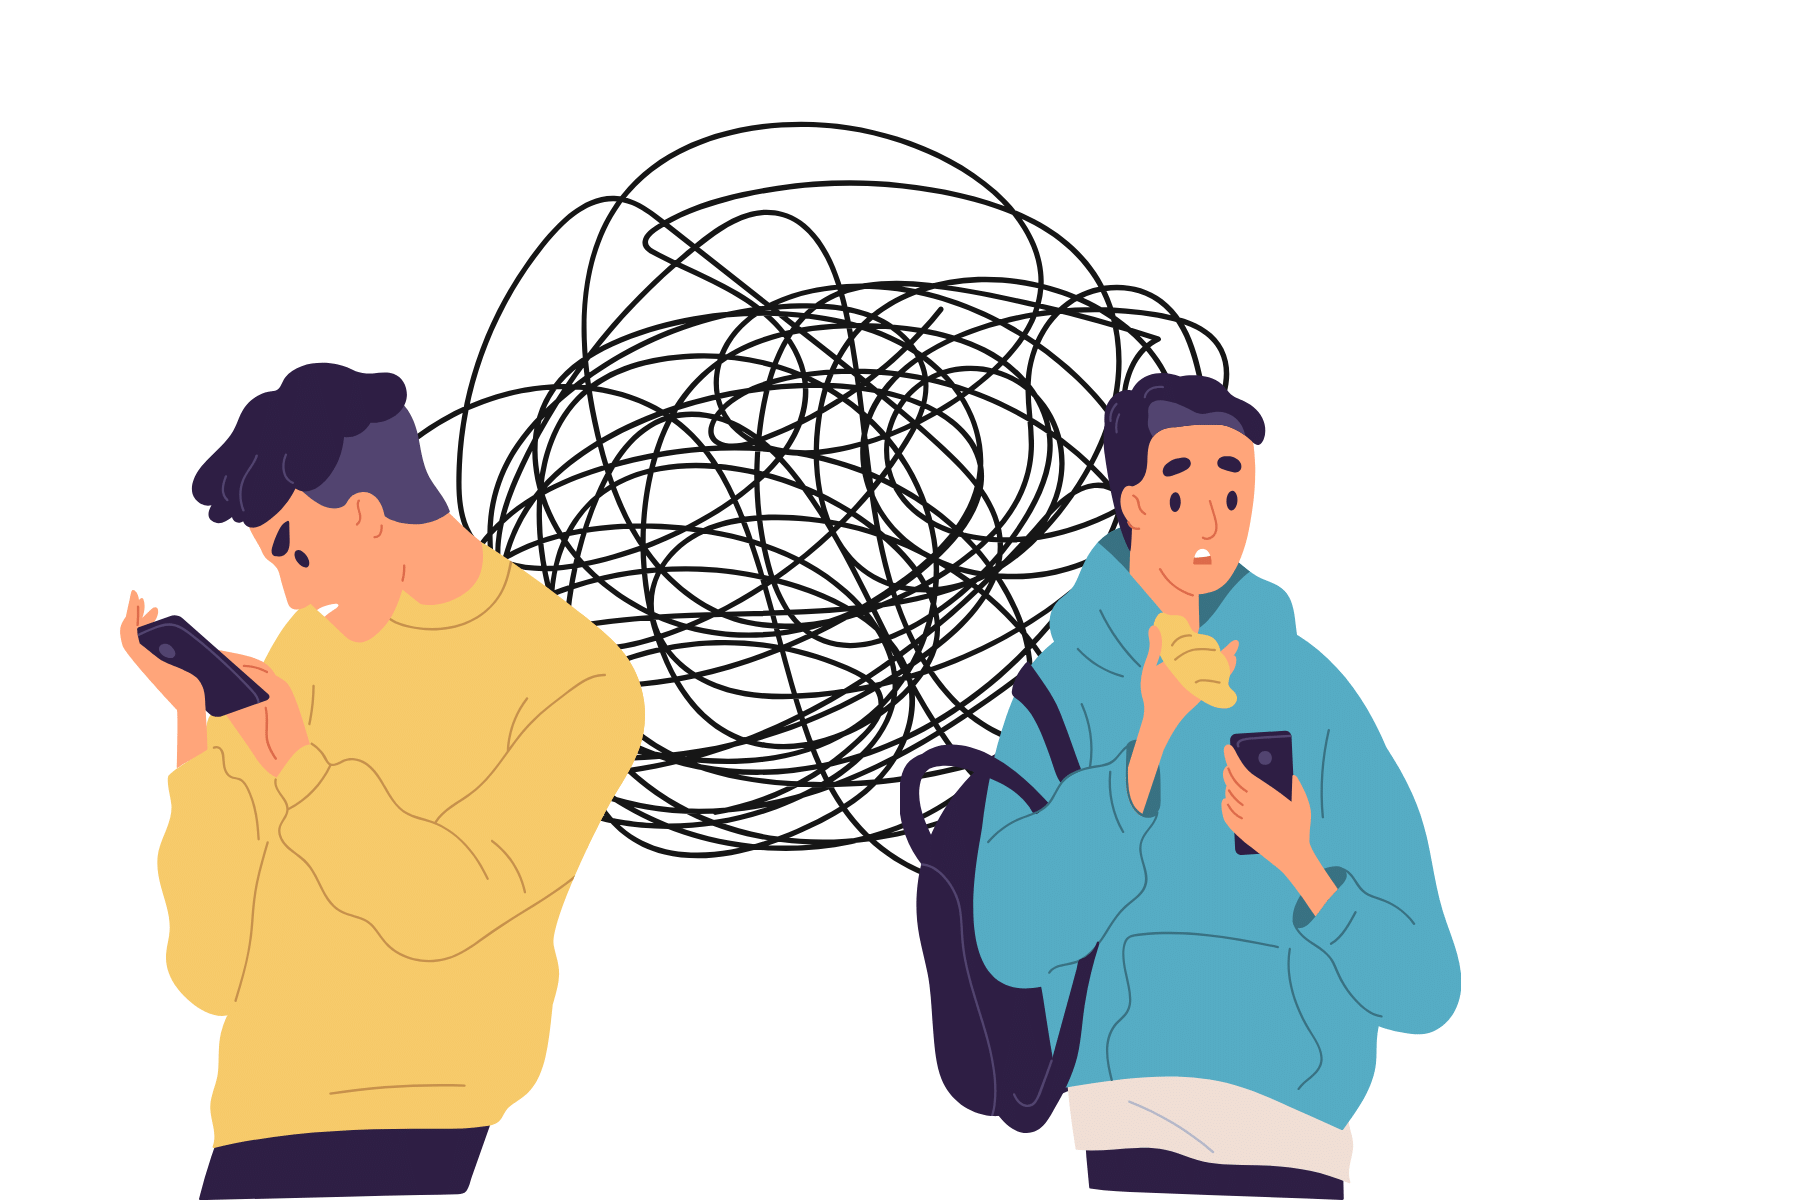 two people on their phones with squiggly lines in between representing confusion